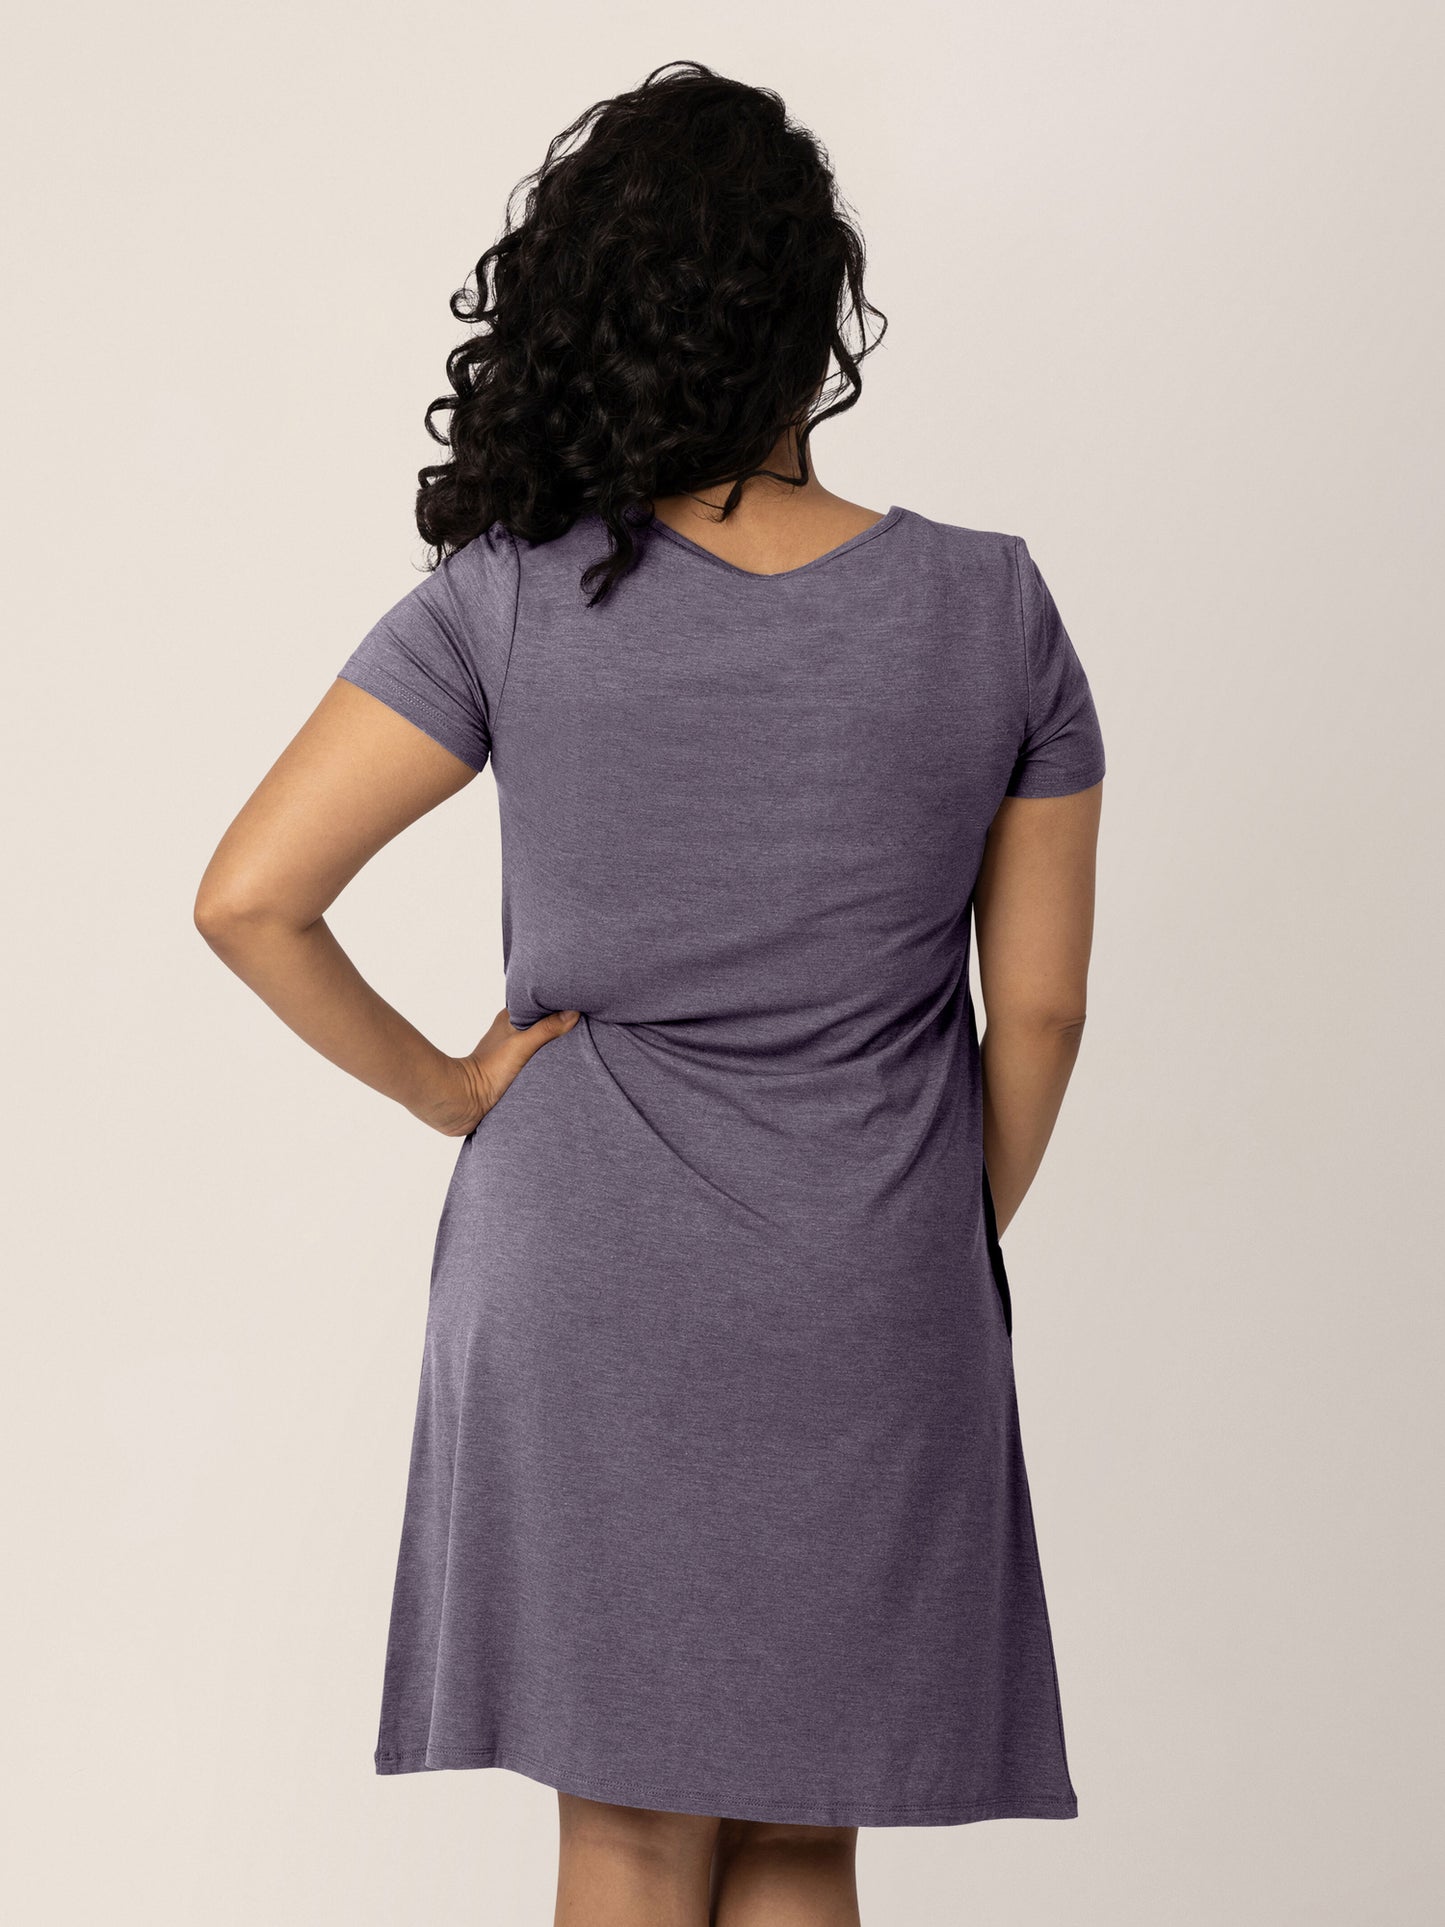 Back view of a model wearing the Eleanora Bamboo Maternity & Nursing Dress in Heathered Granite